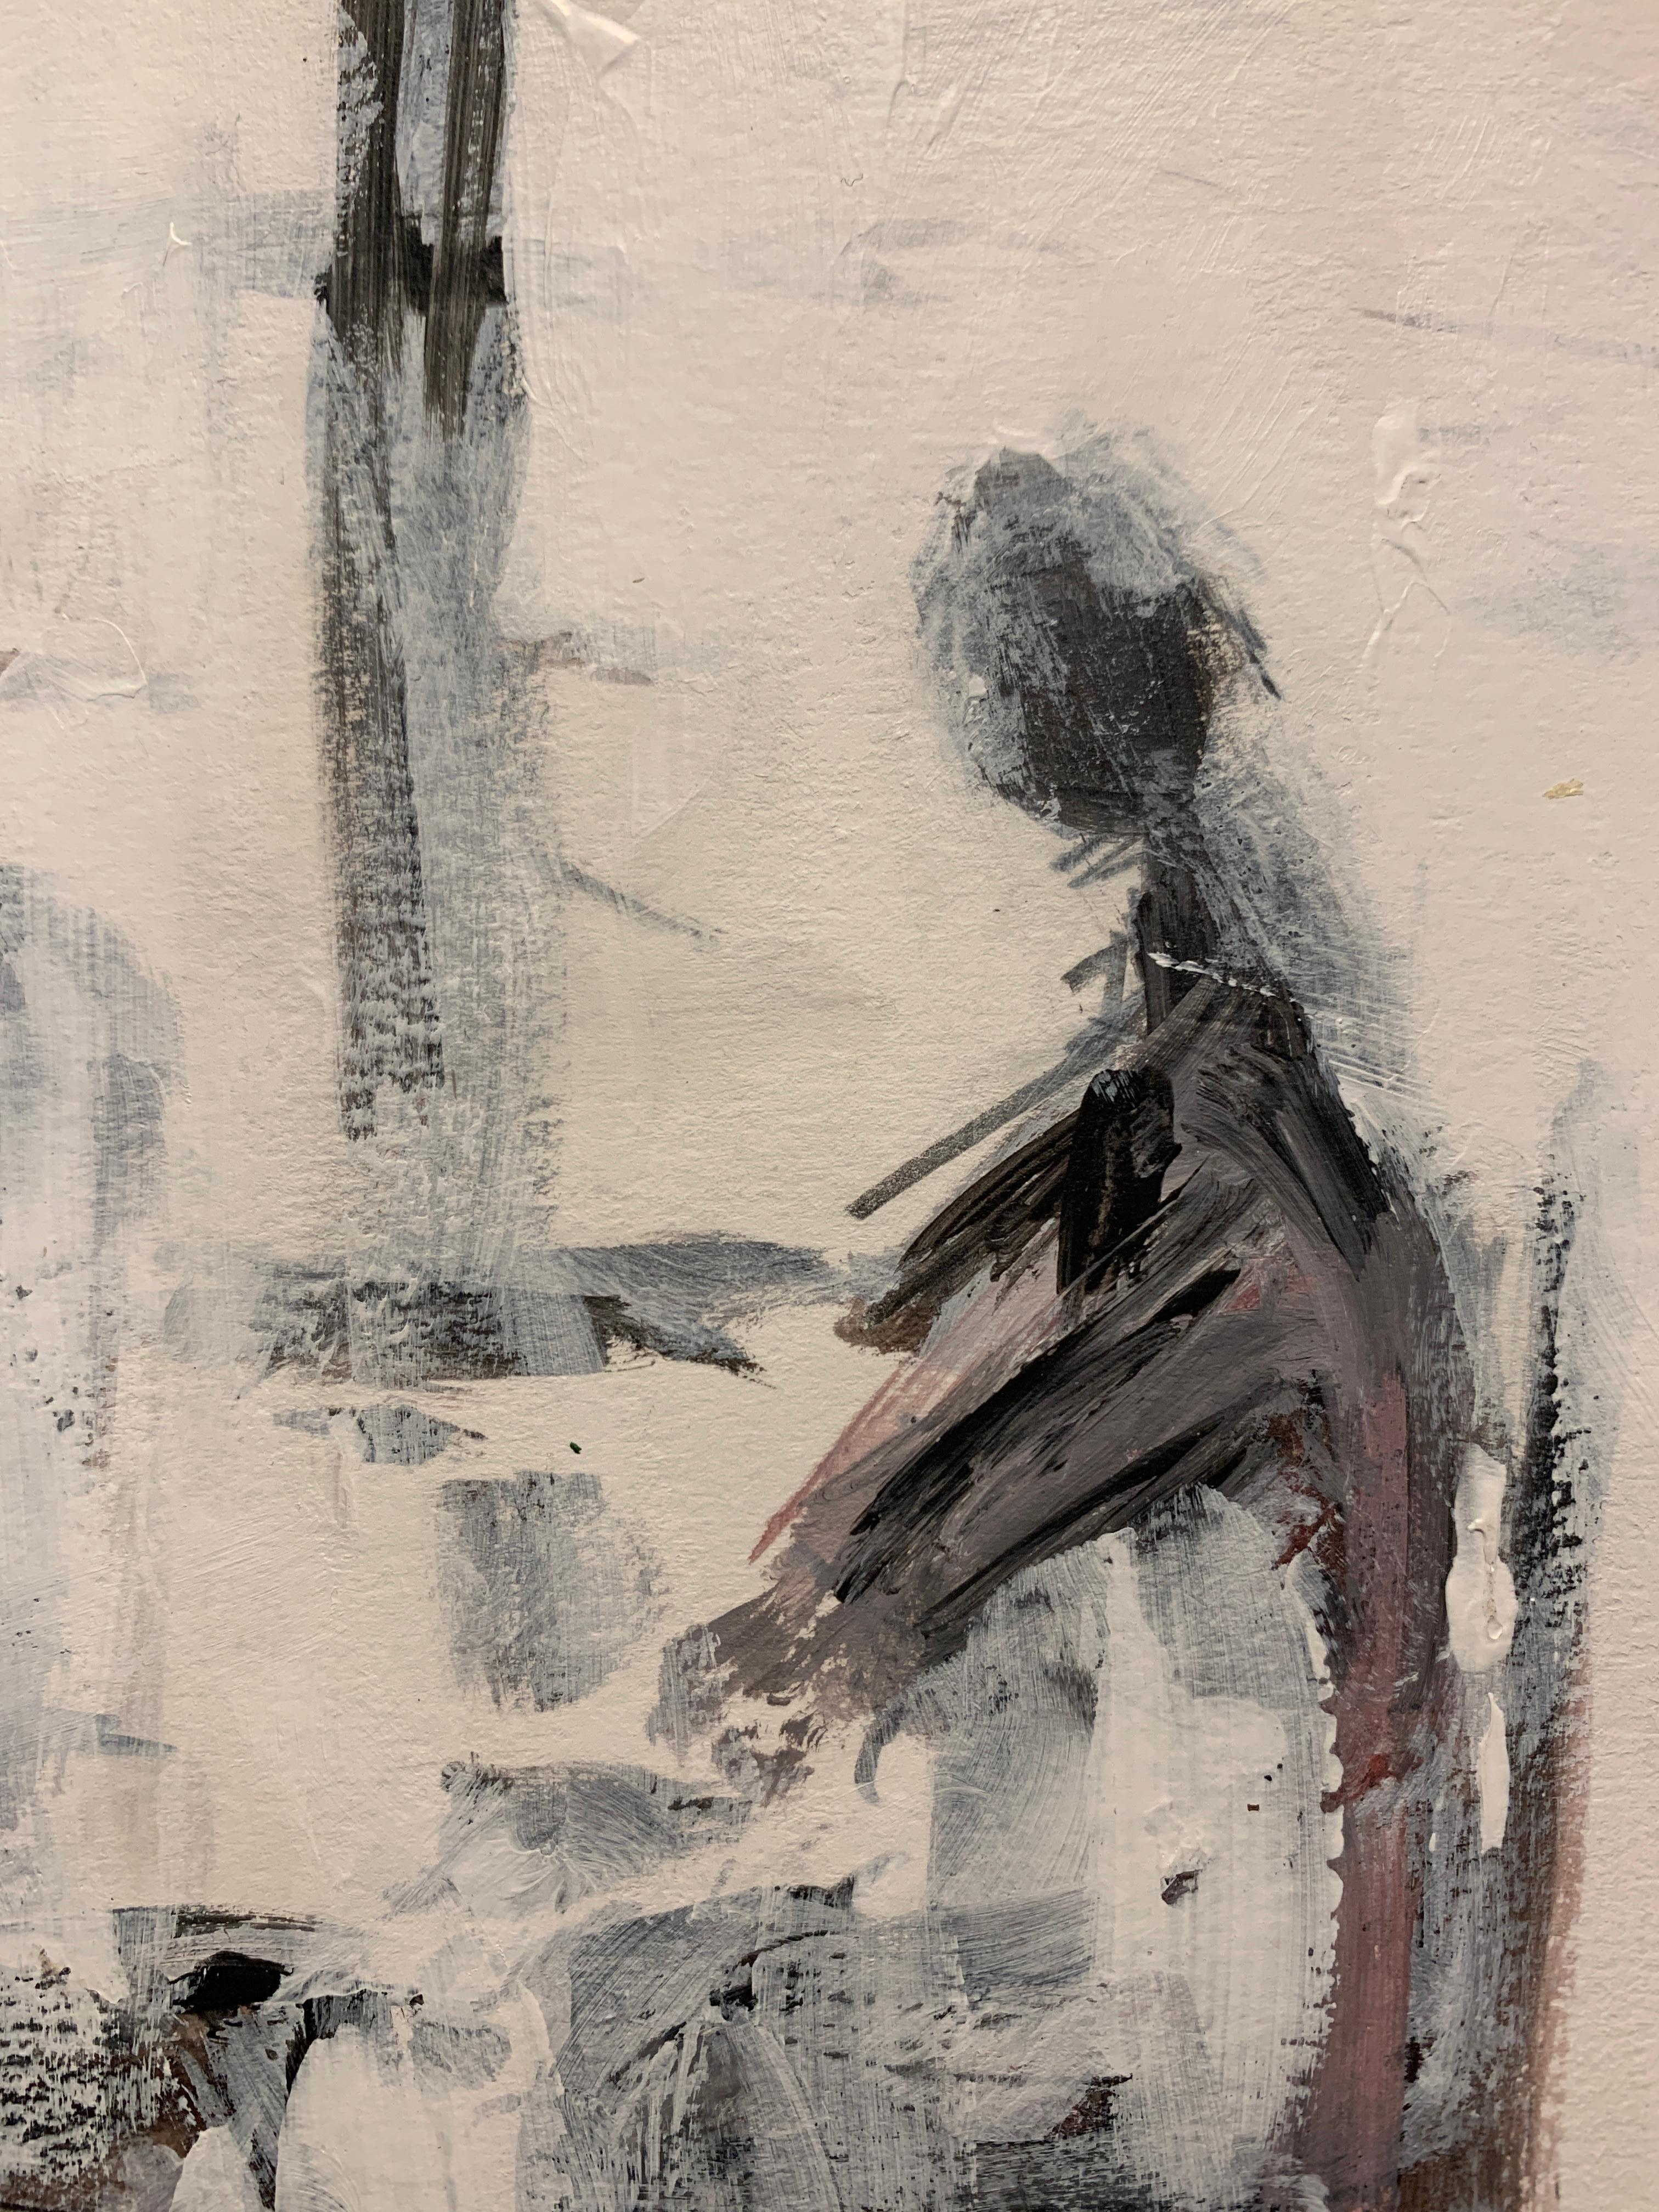 English abstract 20th century oil sketch of a figure in  Black and White - Painting by Bertha Long